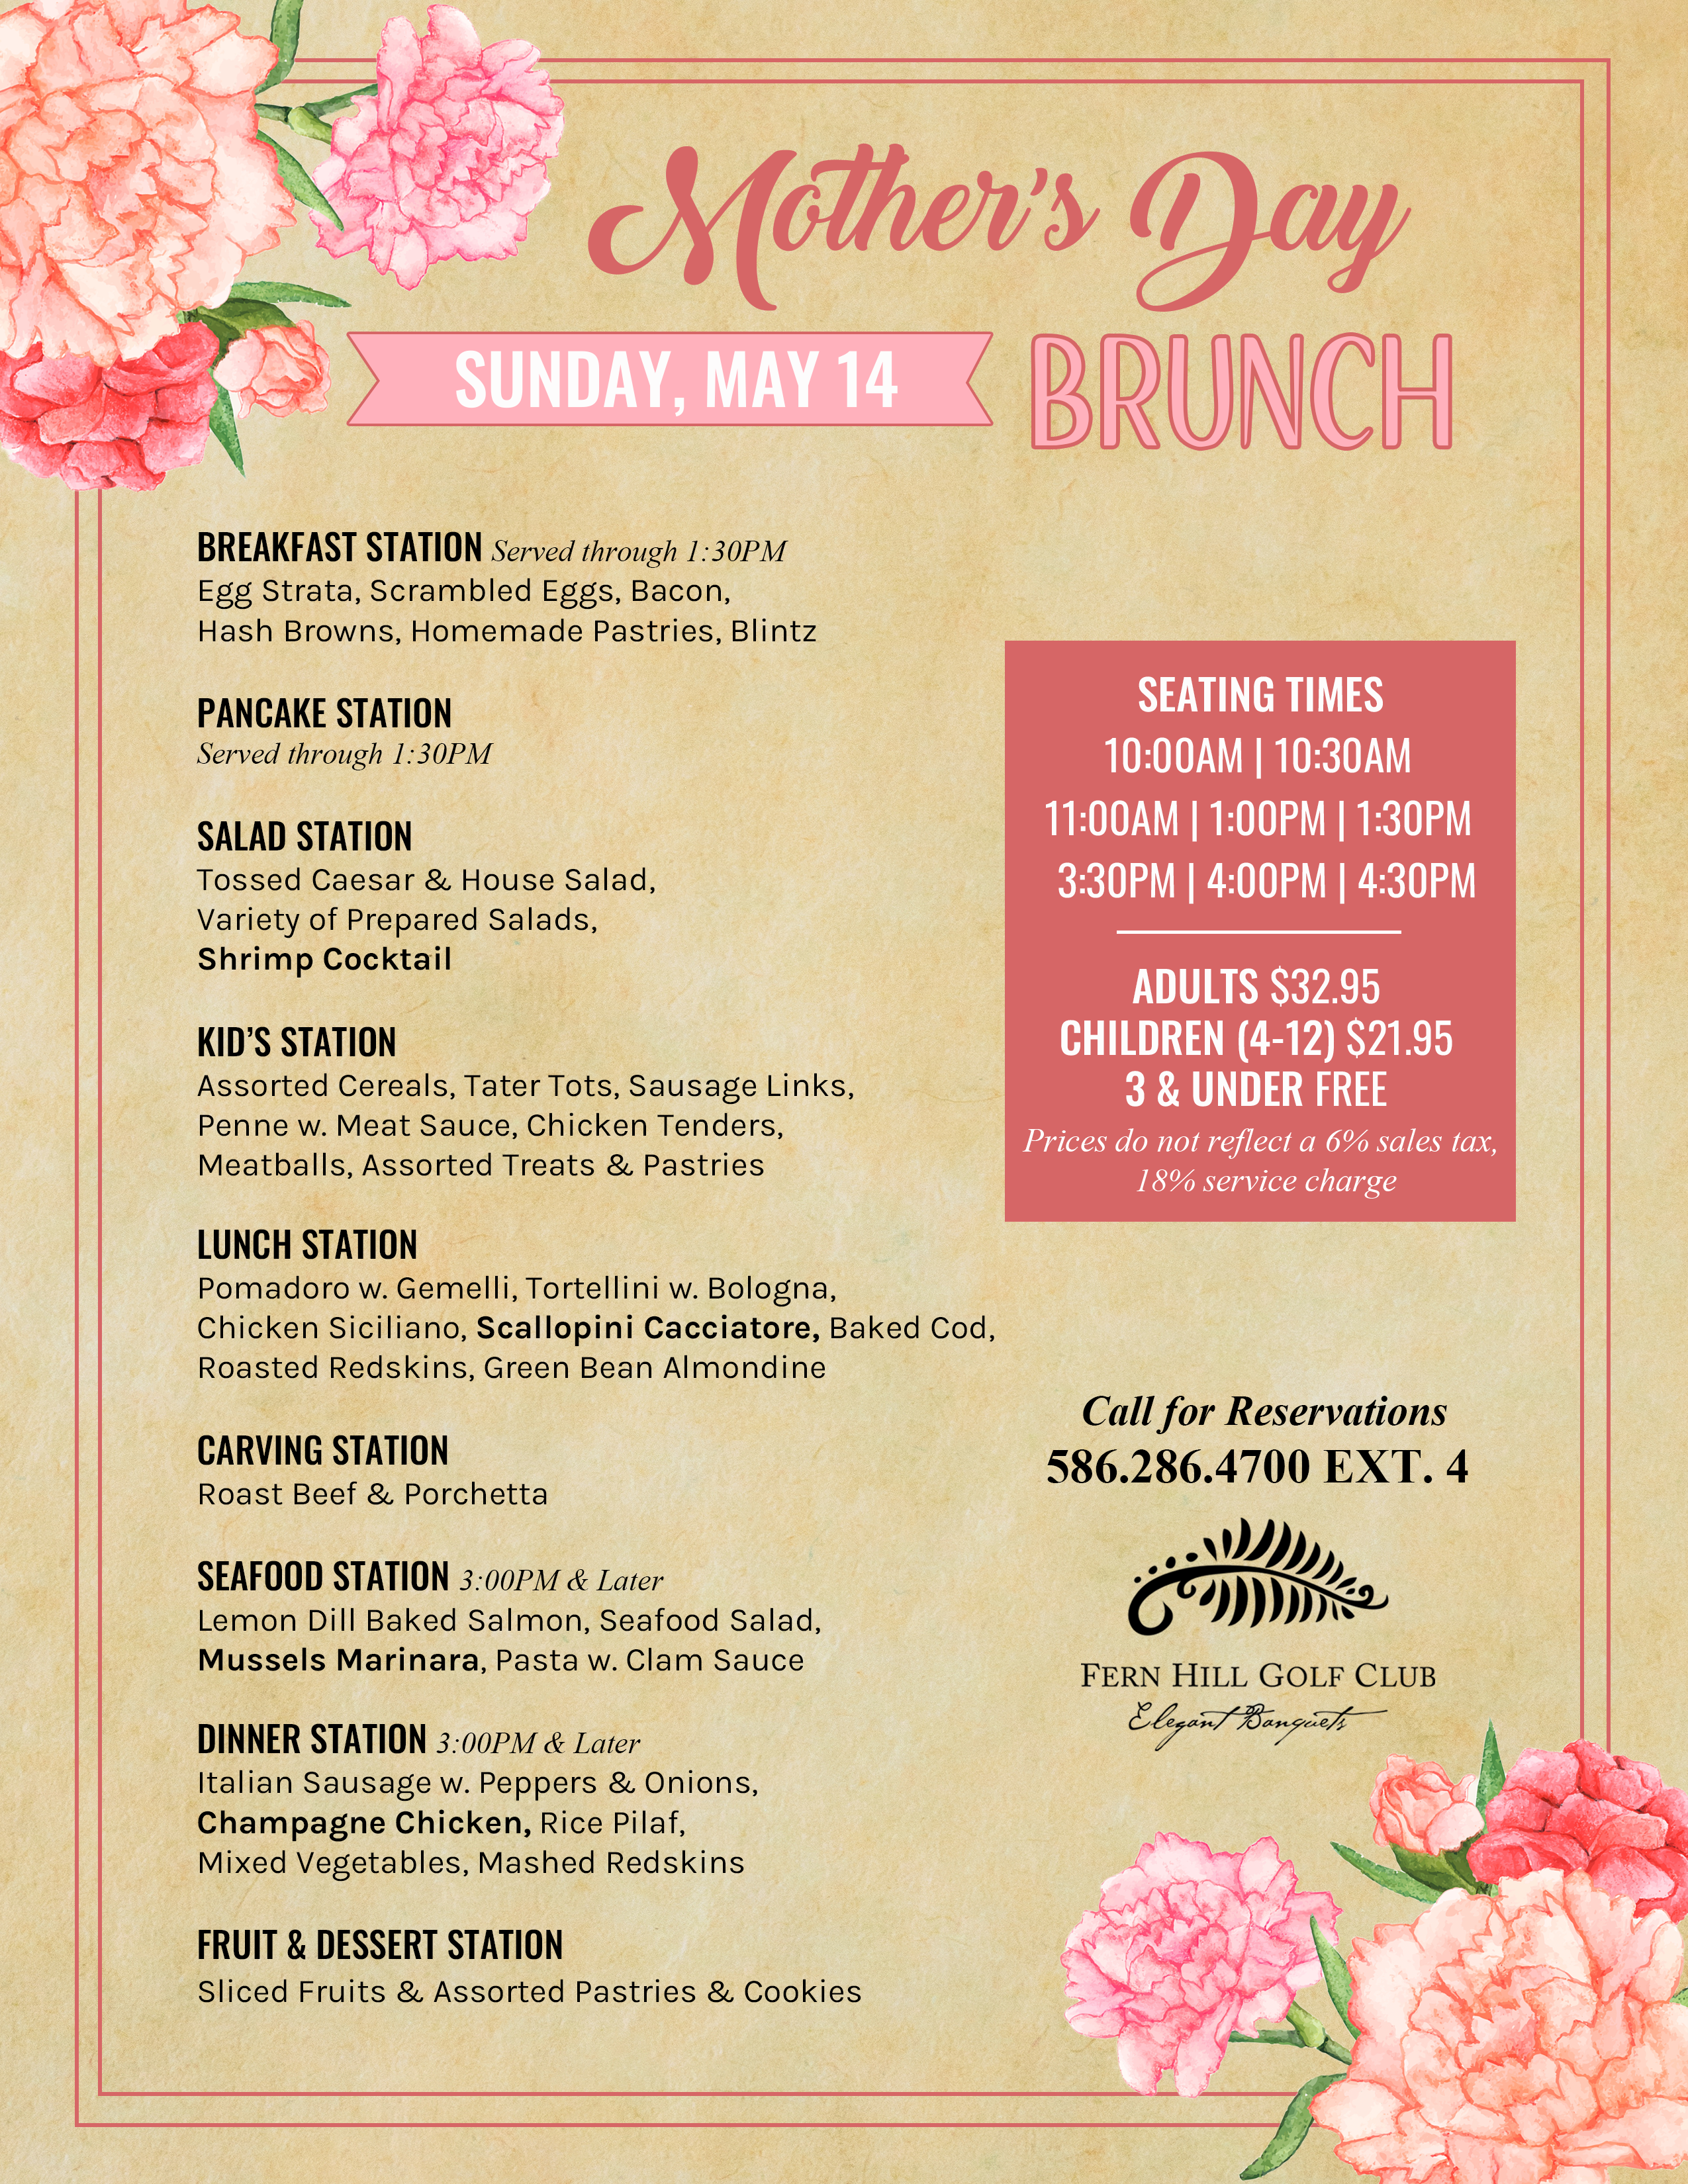 Mother's Day Brunch at Fern Hill Golf Club